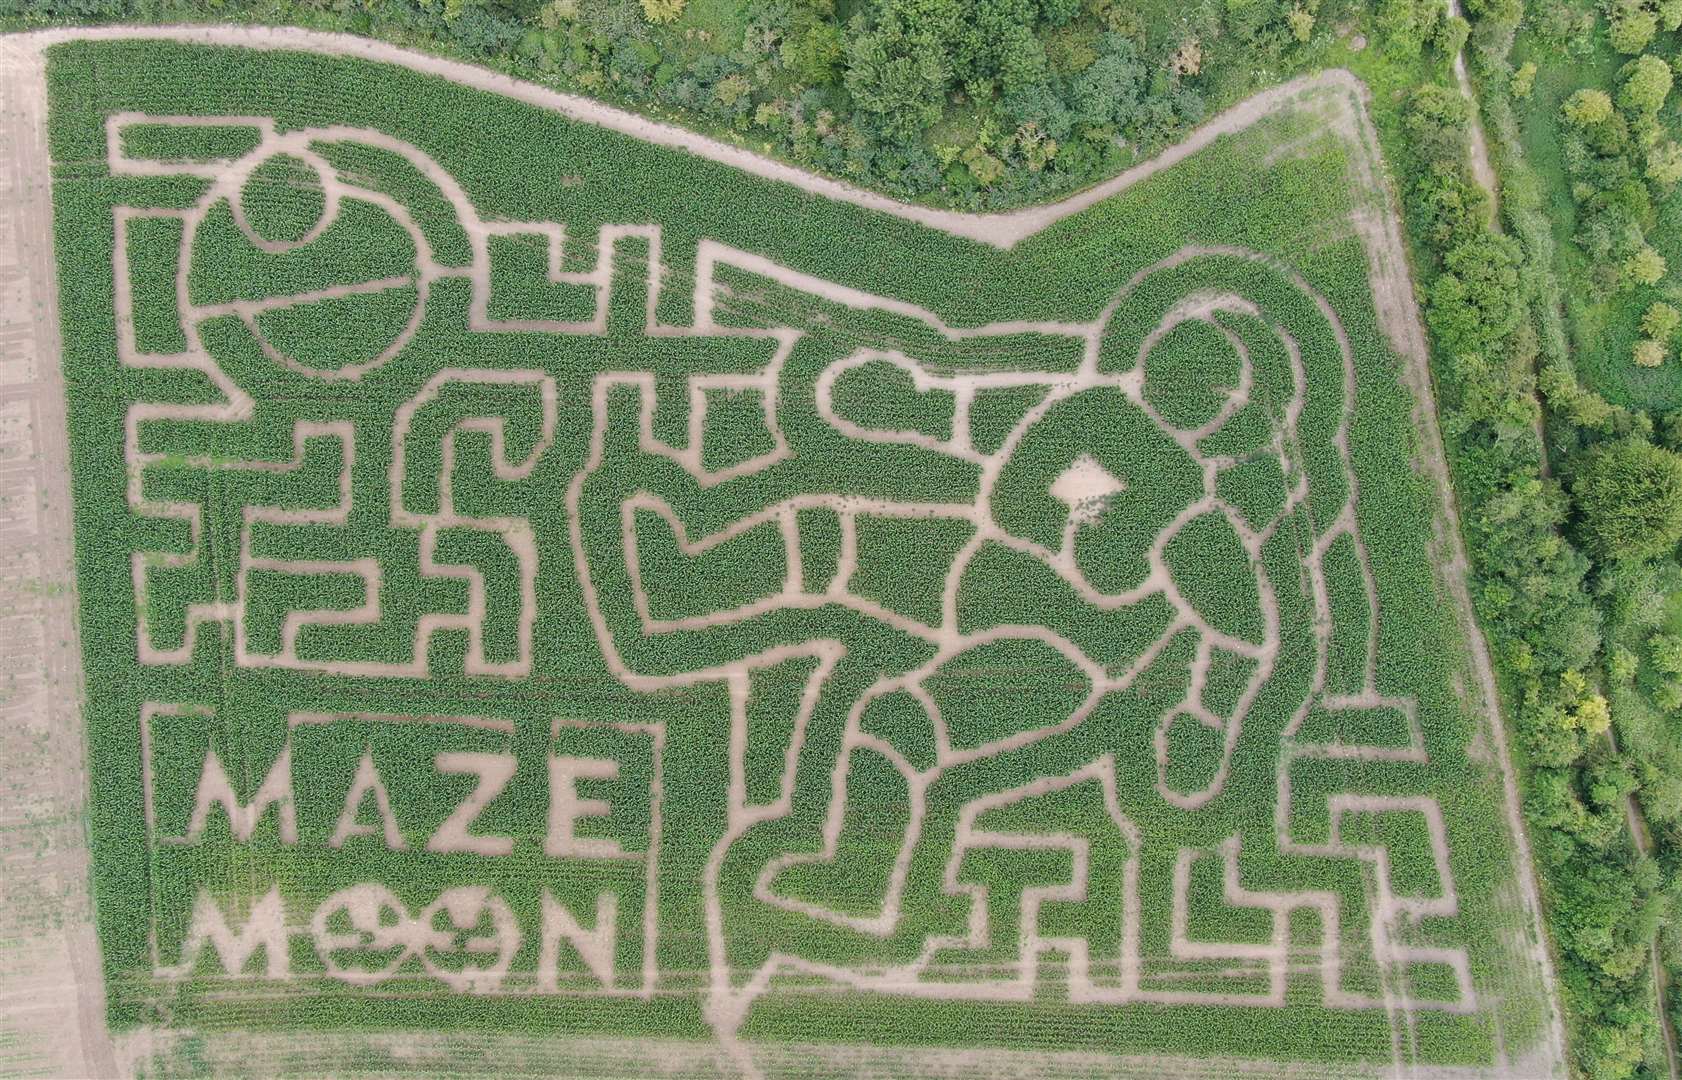 The maze in Rainham featured an astronaut as part of its space-themed maze. Photo: James Kemsley